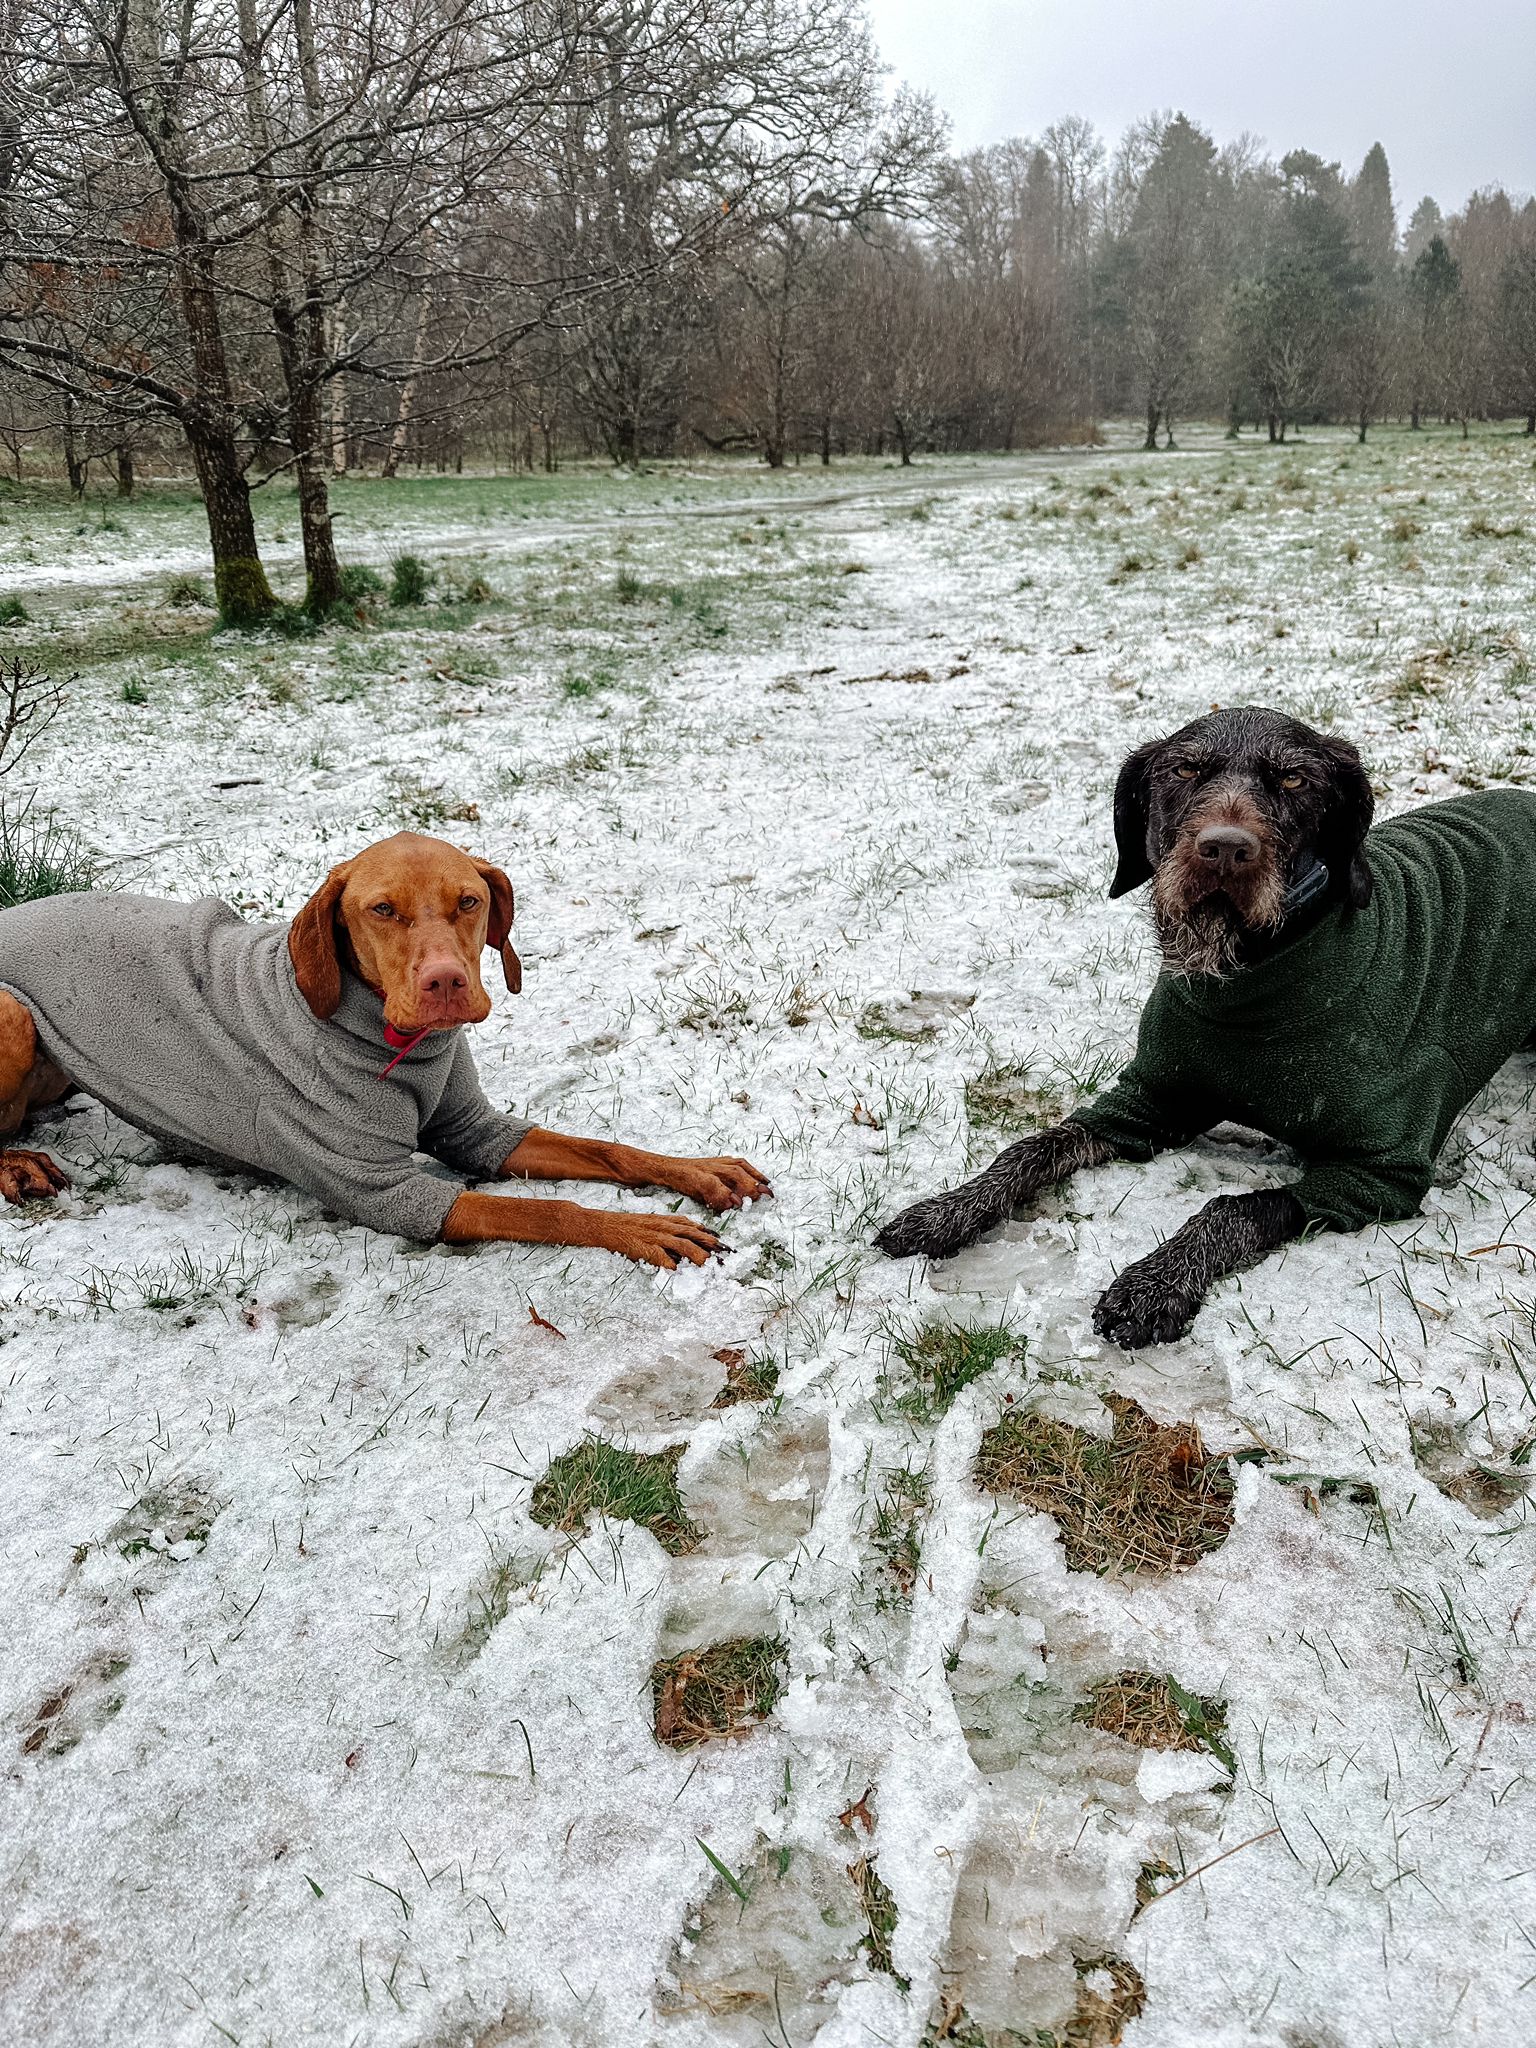 Odin and Ivy enjoying the snow in Balloch (Credit: Fabiana Cacace).